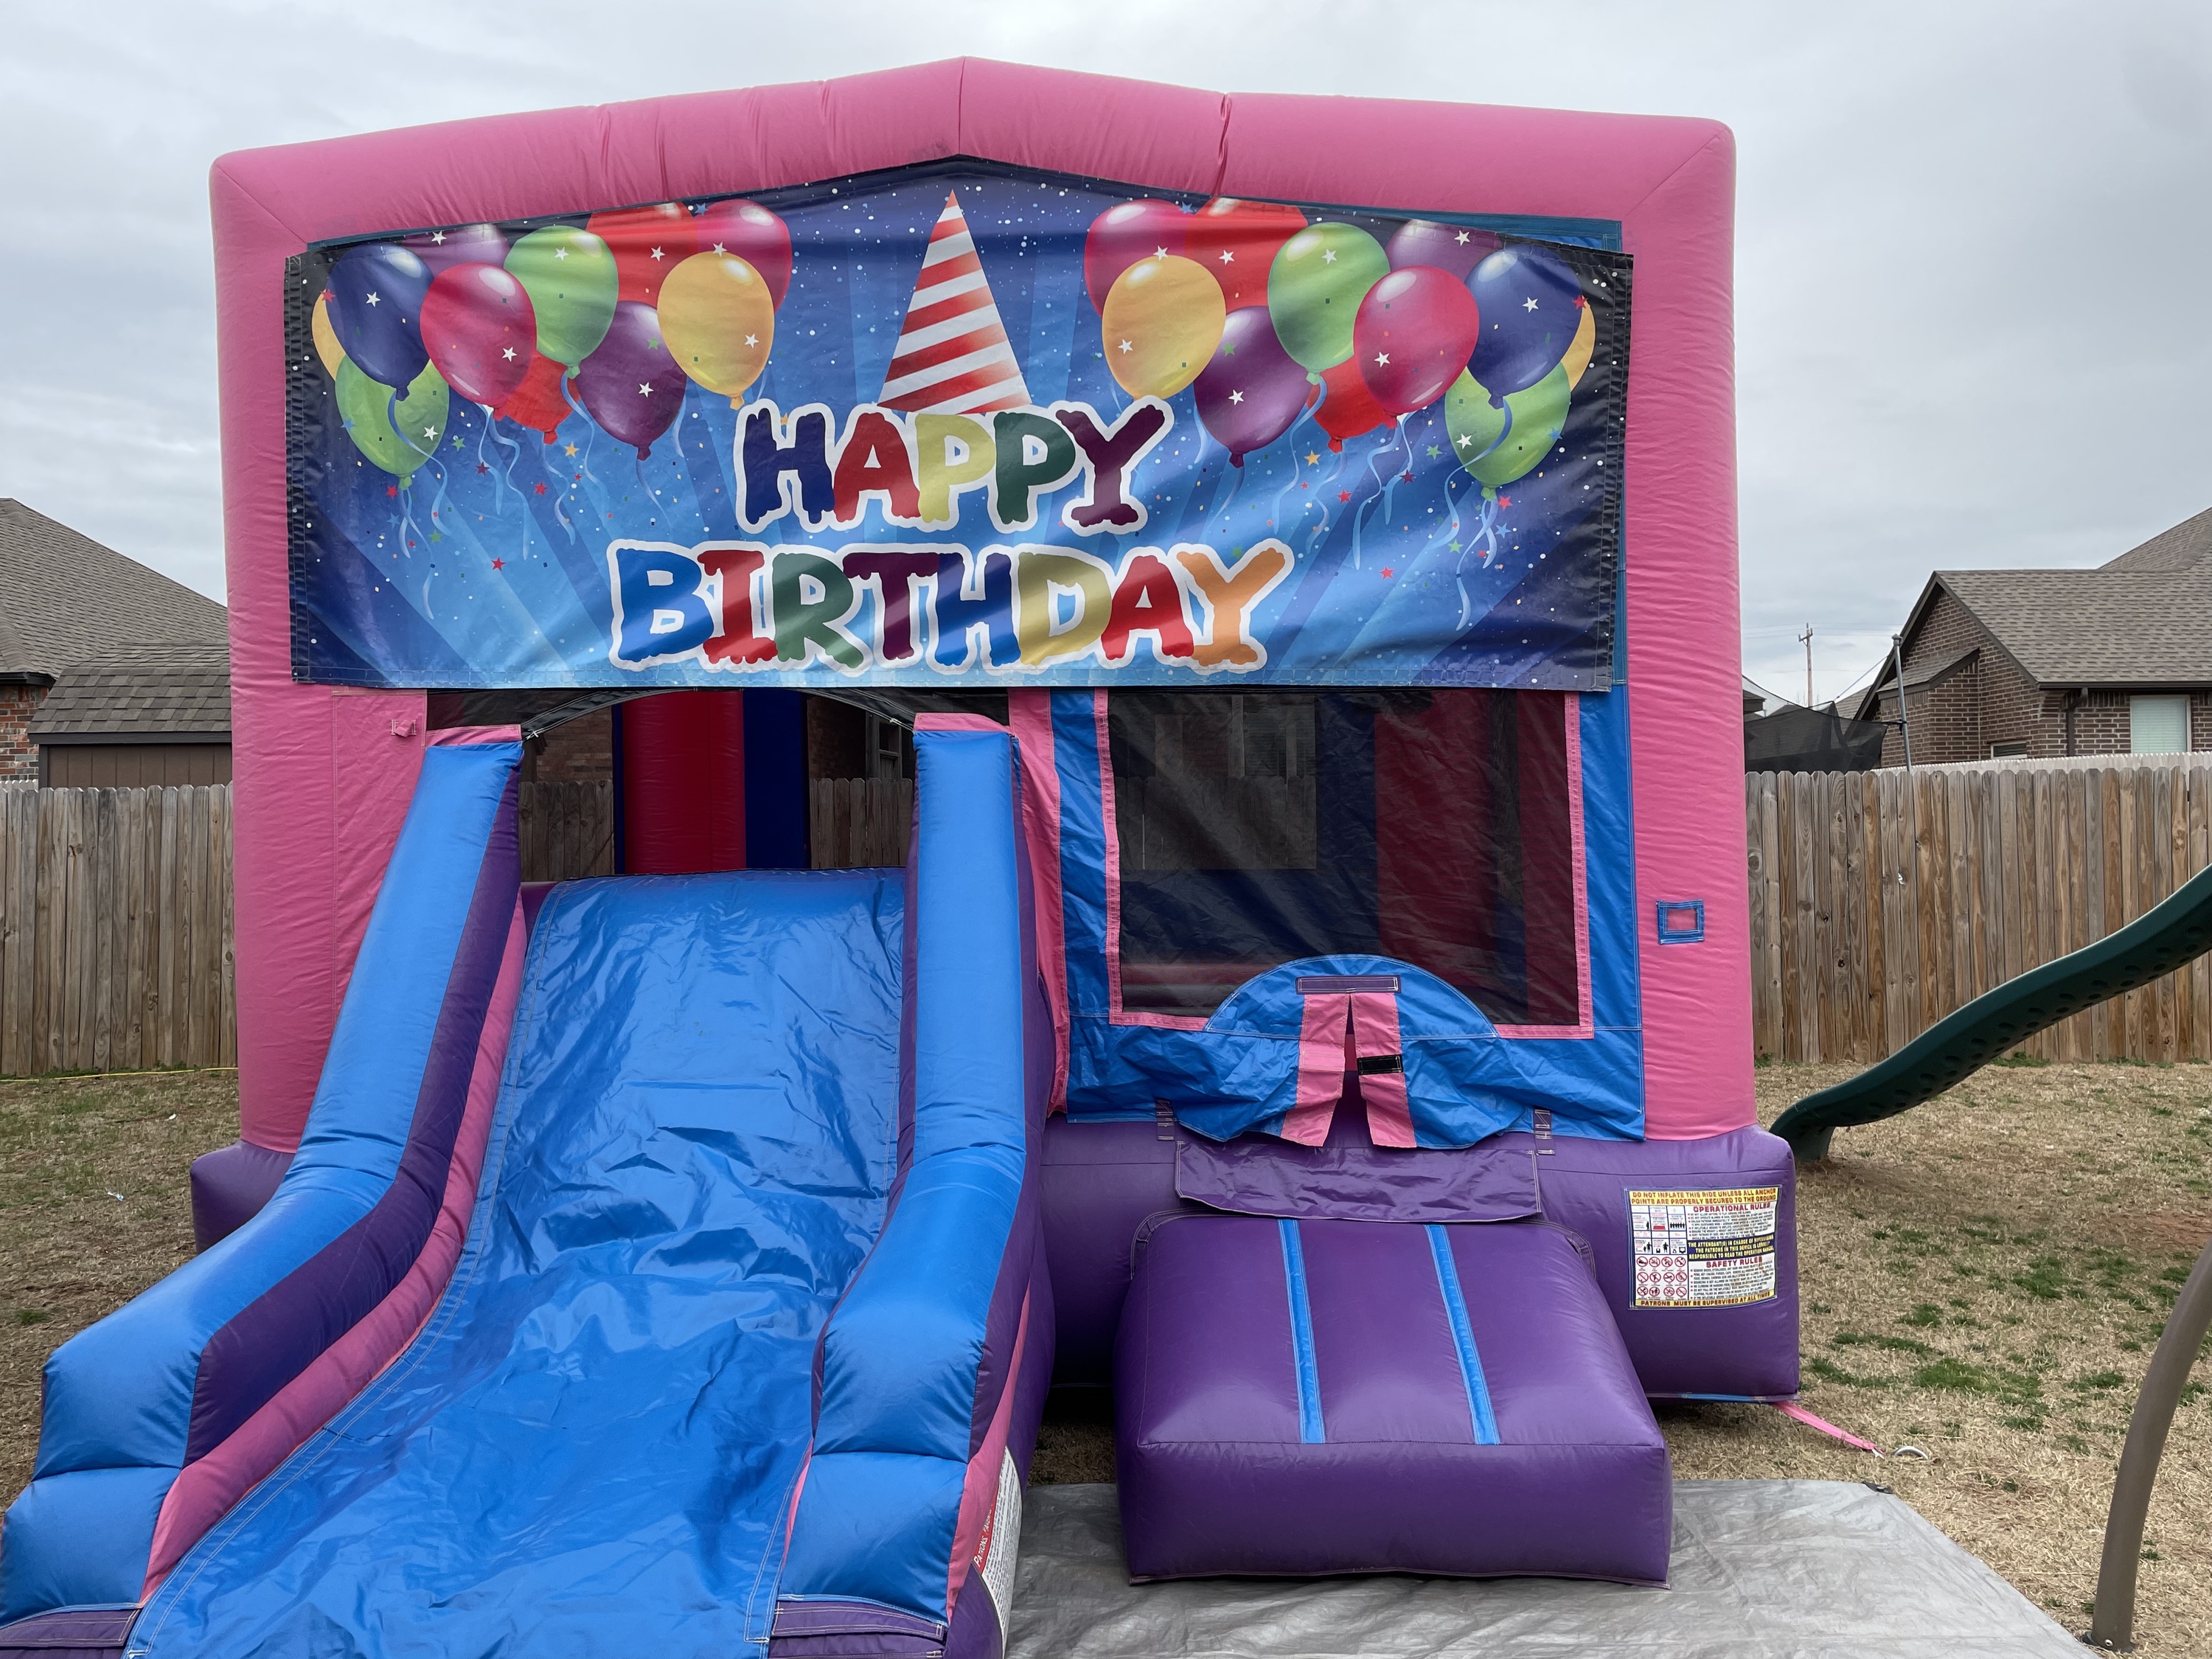 The Bounce House Rental Oklahoma City Uses at Events Year-Round